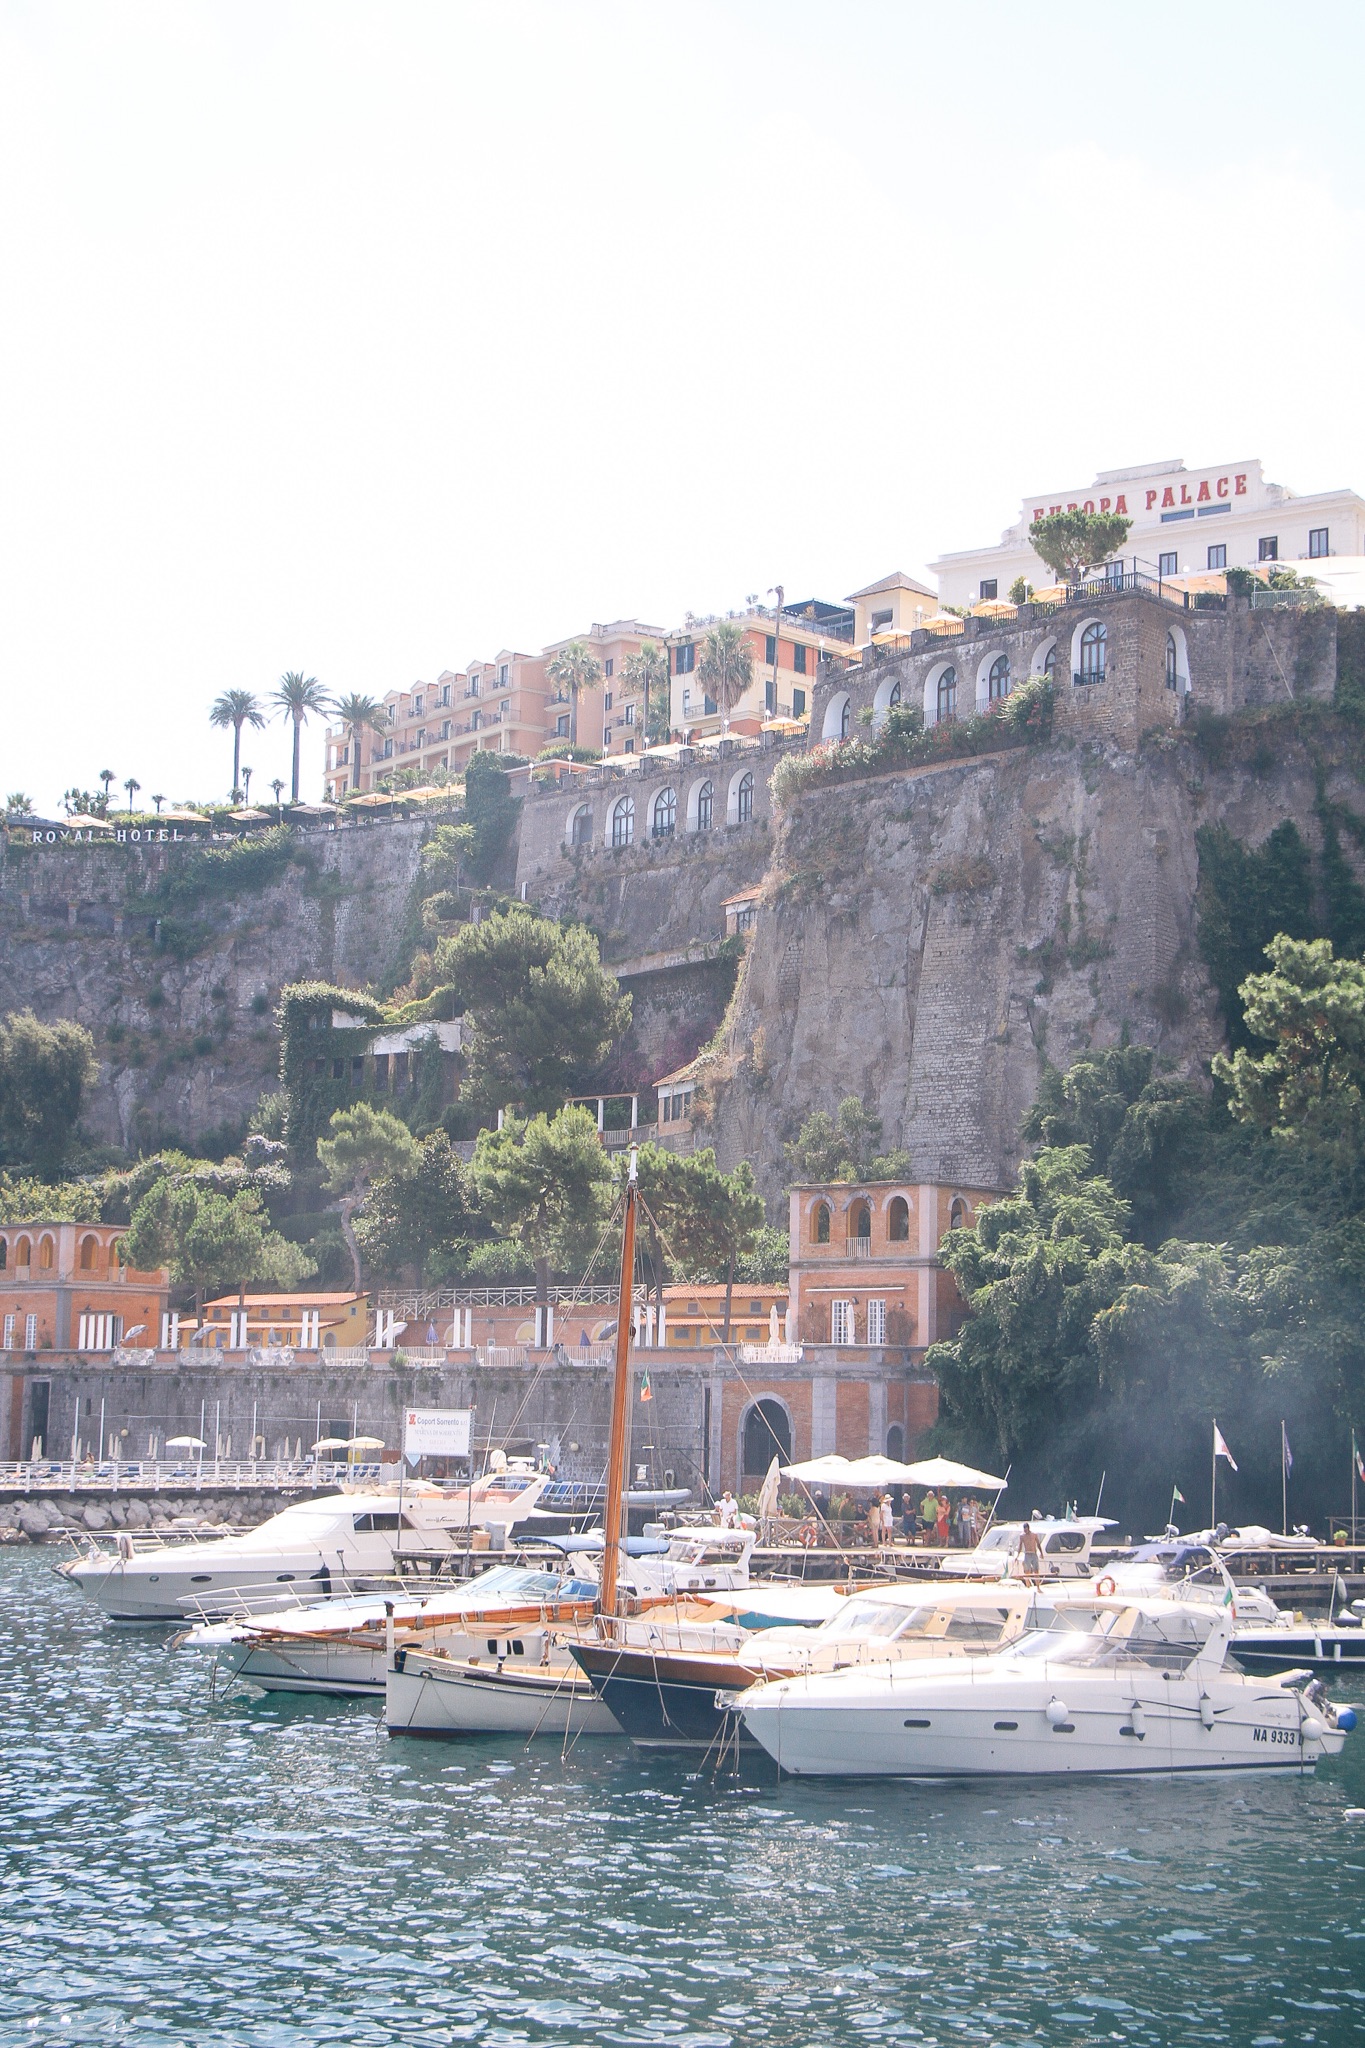 My Complete Guide to the Amalfi Coast